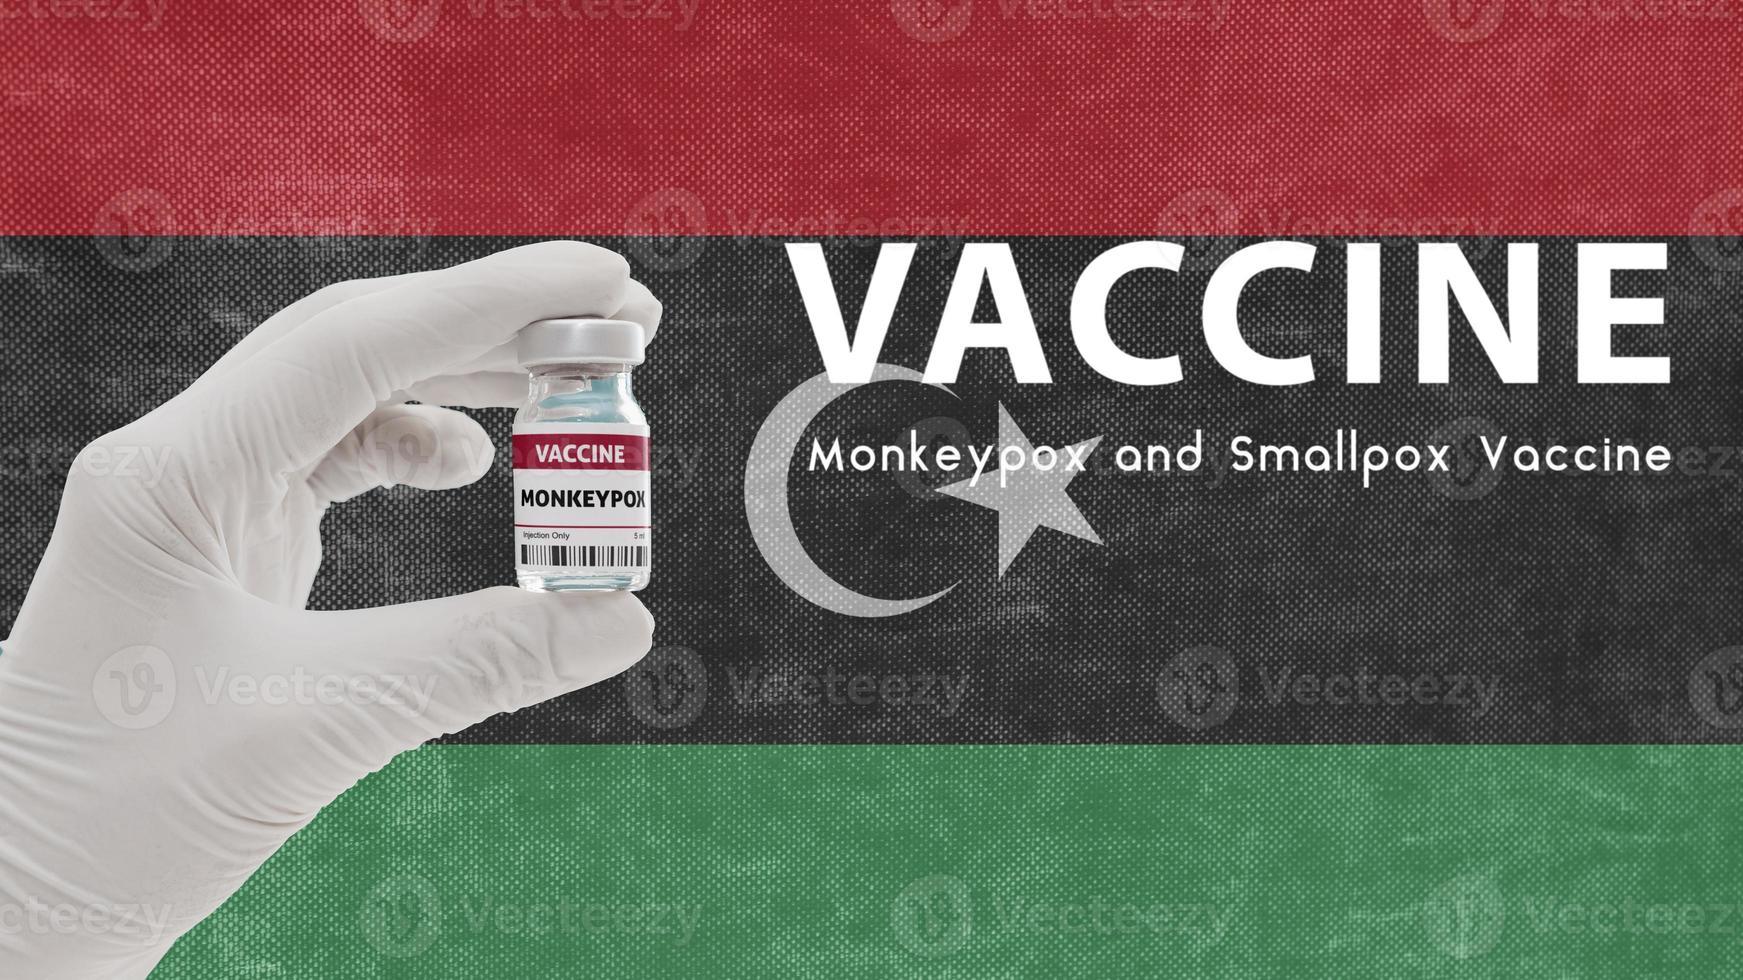 Vaccine Monkeypox and Smallpox, monkeypox pandemic virus, vaccination in Libya for Monkeypox Image has Noise, Granularity and Compression Artifacts photo